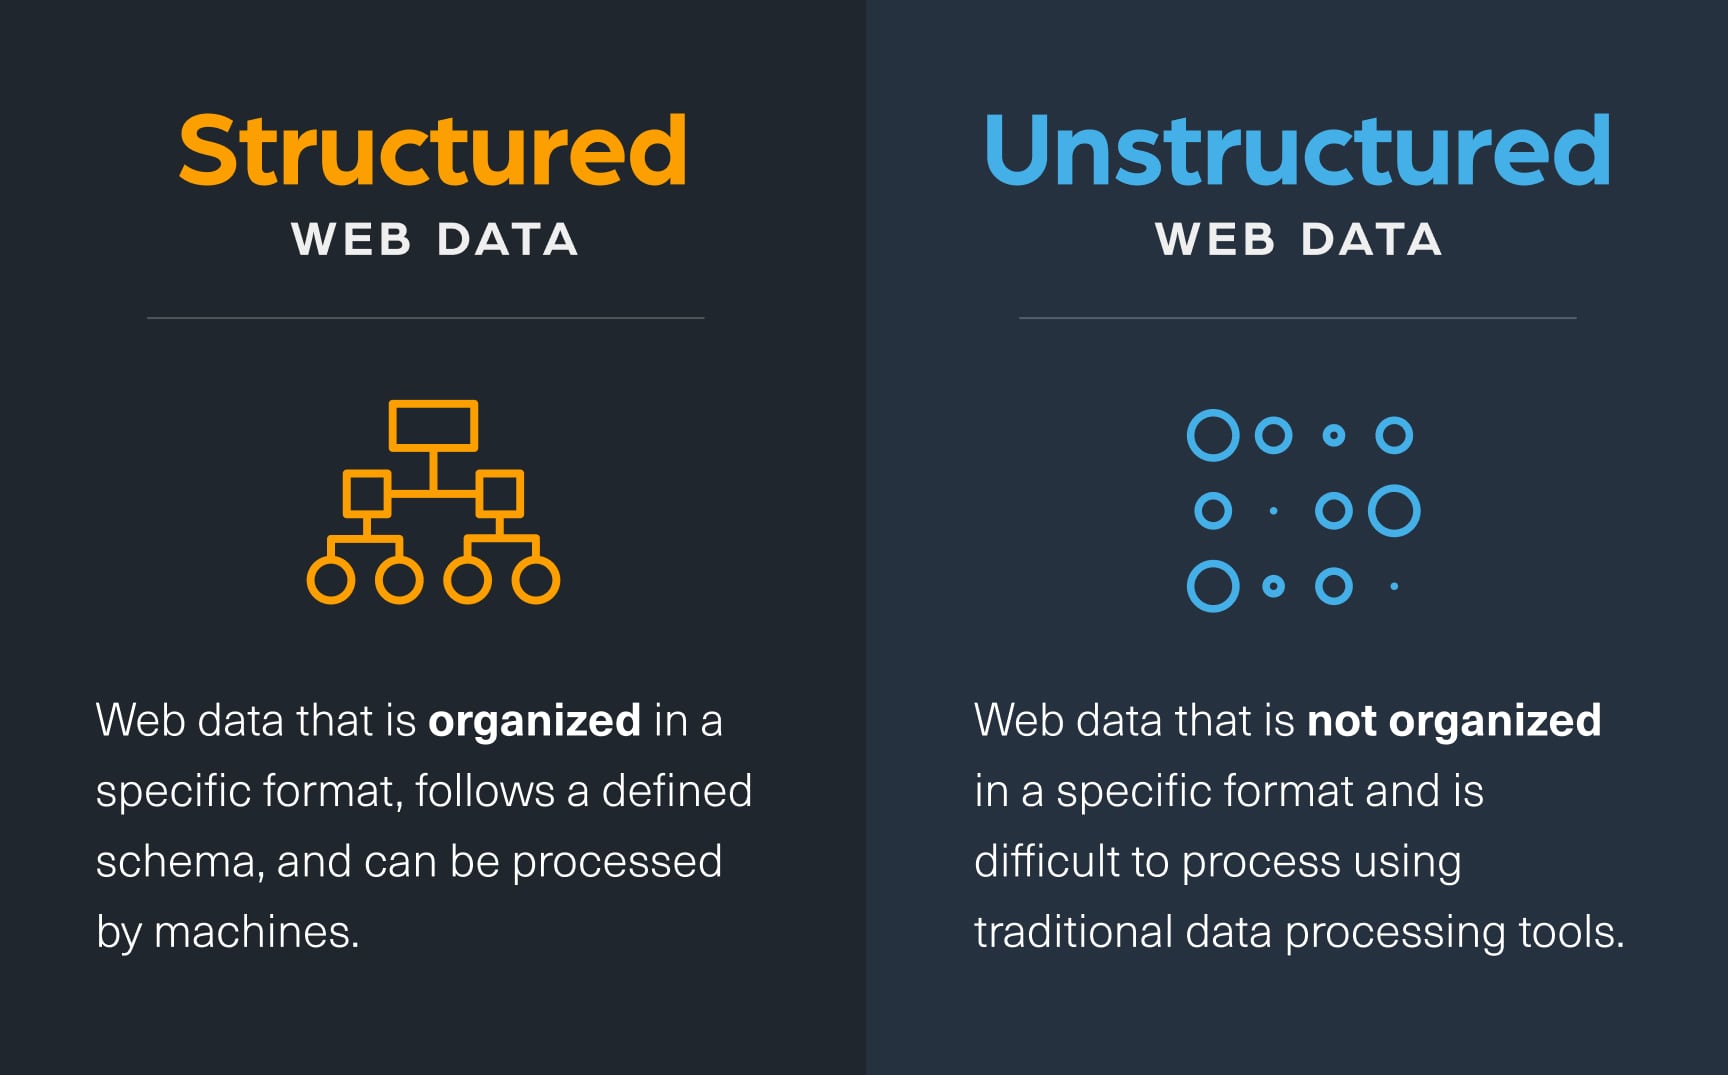 Structured Web Data vs Unstructured Web Data